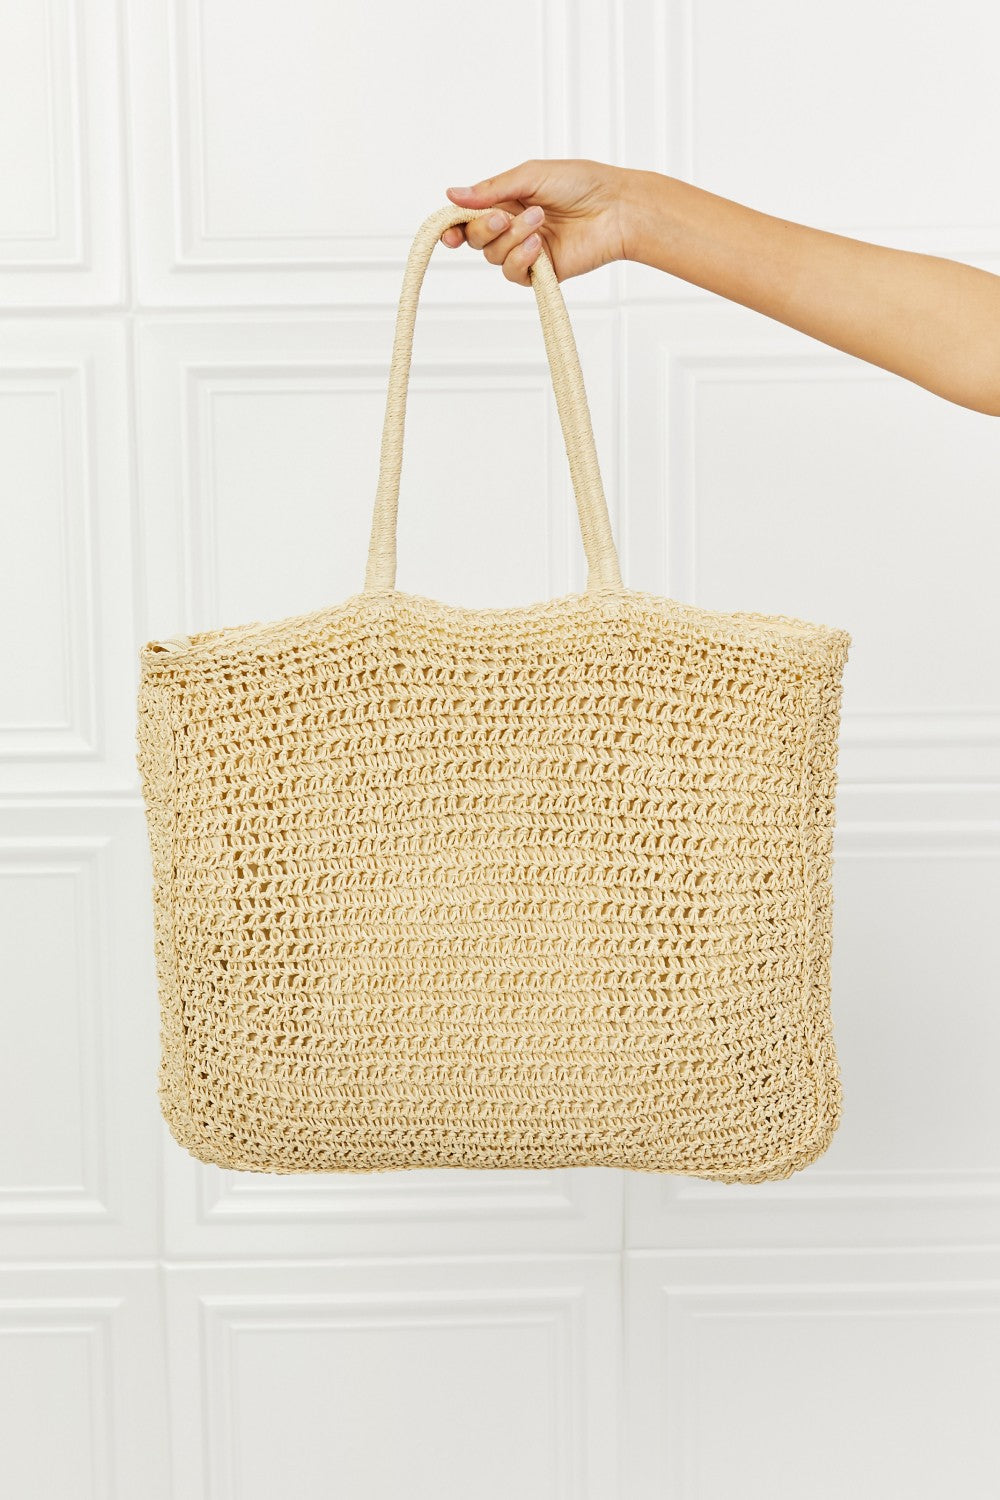 Fame Off The Coast Straw Tote Bag - nailedmoms